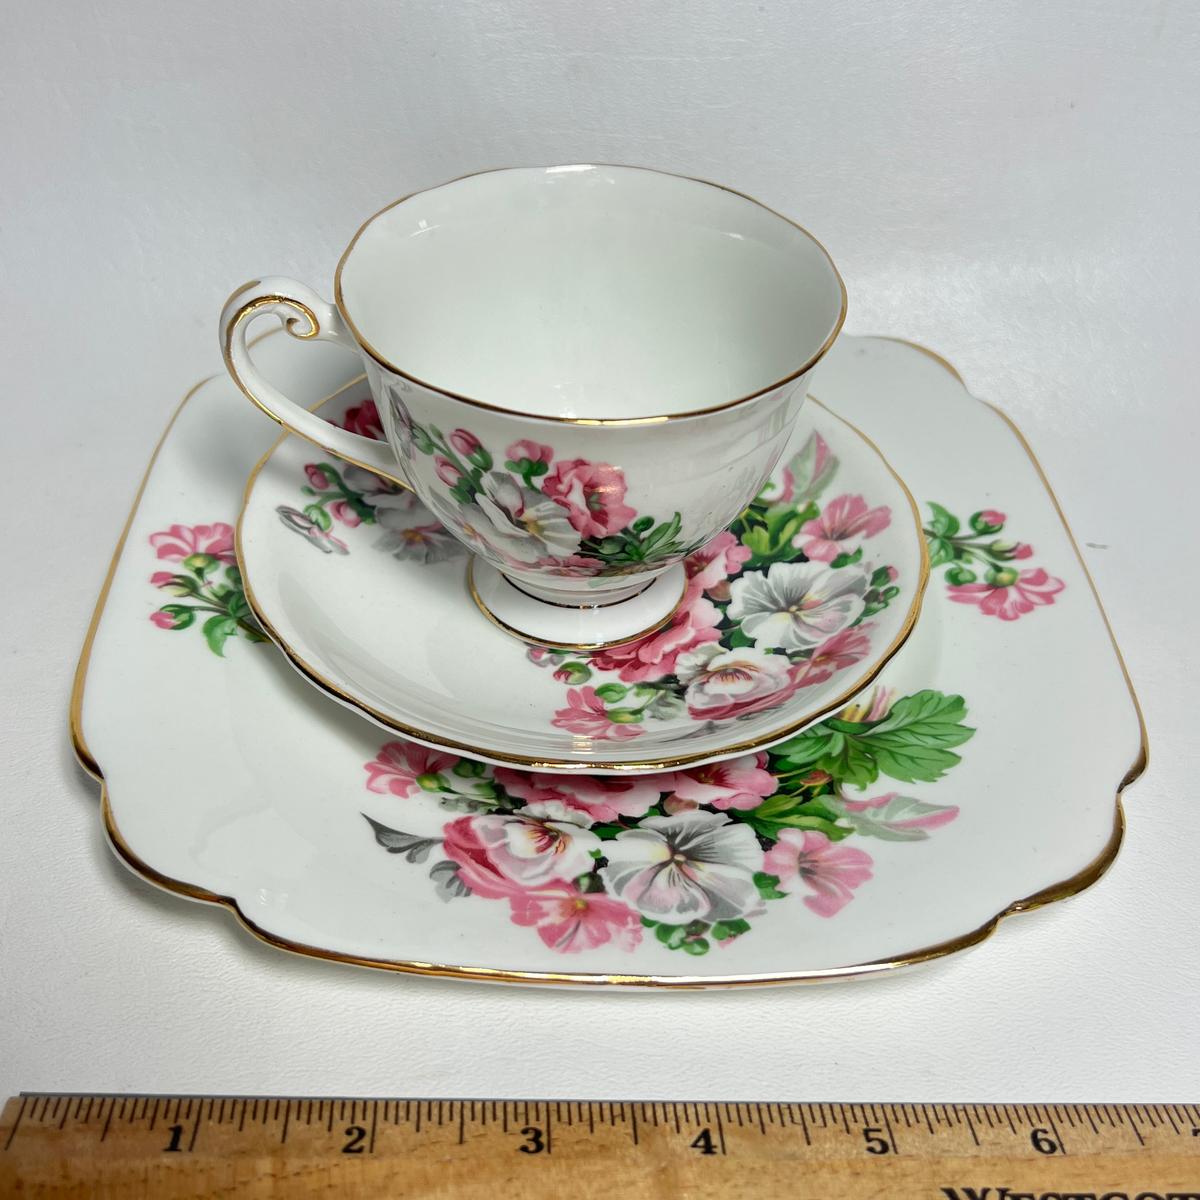 Clarence Bone China 3 Pc Tea Cup, Saucer & Plate Made in England